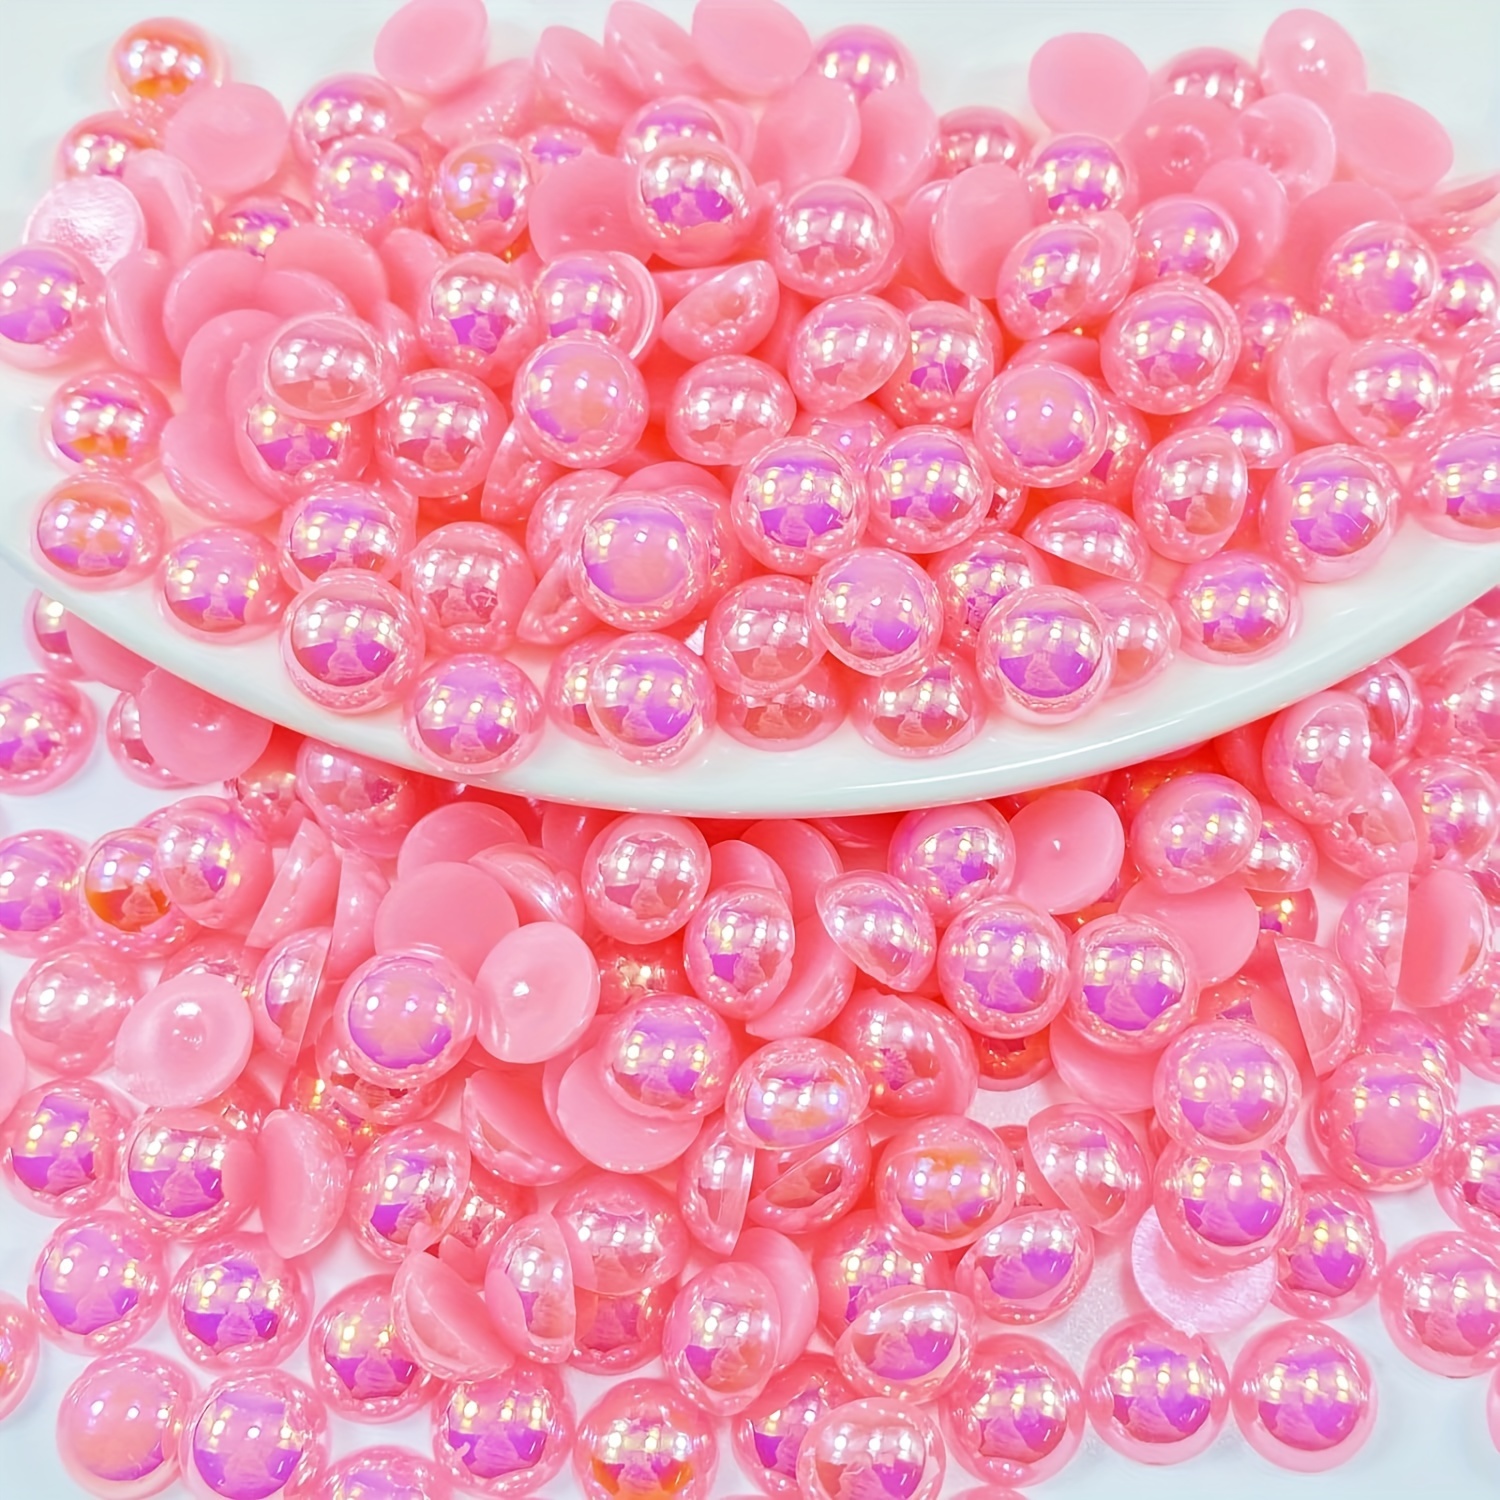 3800 Pcs 3 Boxes Flat Back Pearls Kits Flatback Colorful AB+White AB+Beige  AB Half Round Pearls with Pickup Pencil and Tweezer for Home DIY and  Professional Nail Art Face Makeup and Craft